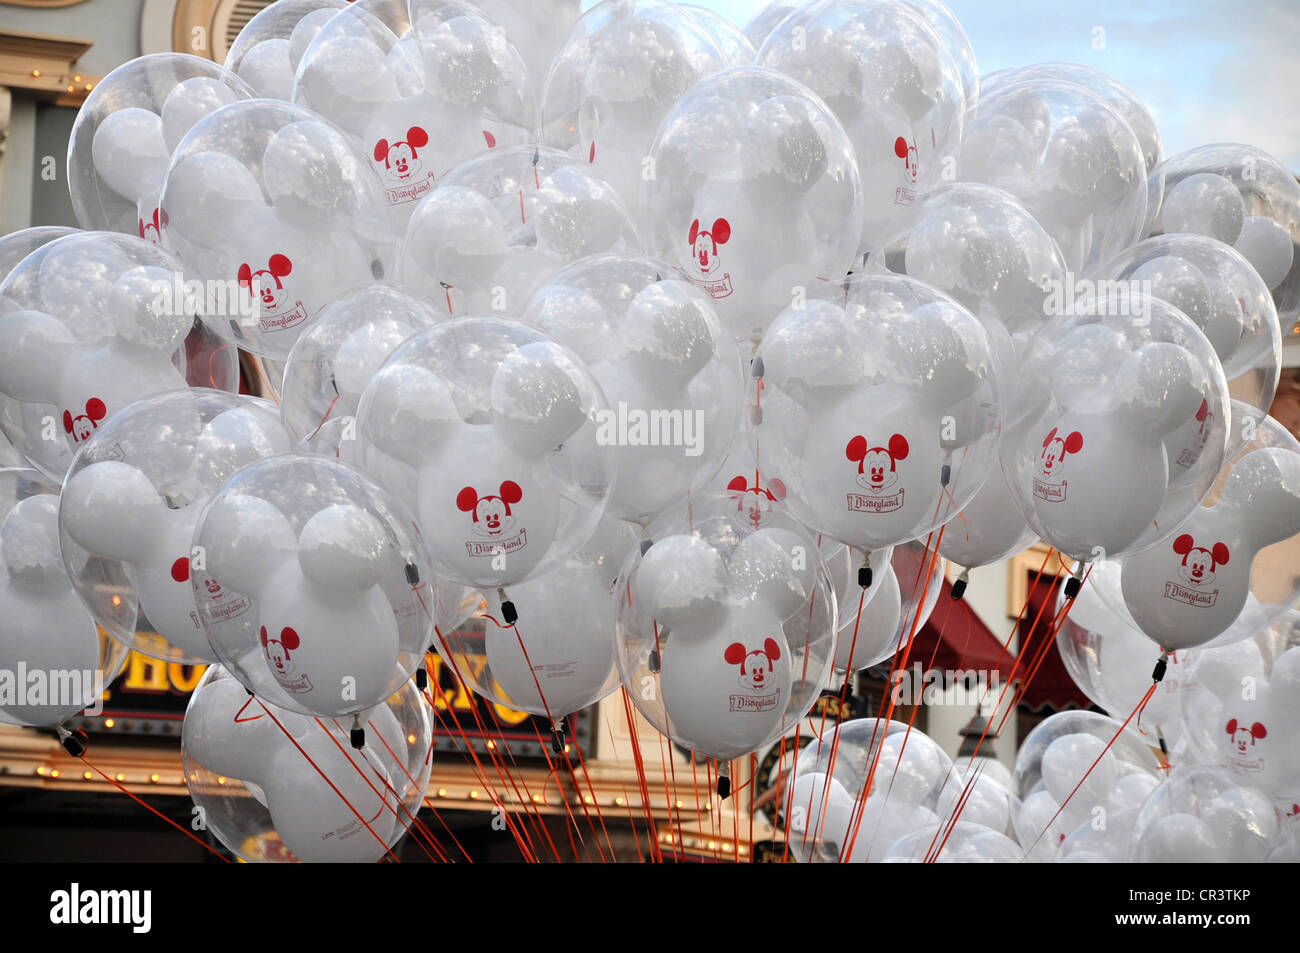 Mickey Mouse Souvenir High Resolution Stock Photography and Images - Alamy